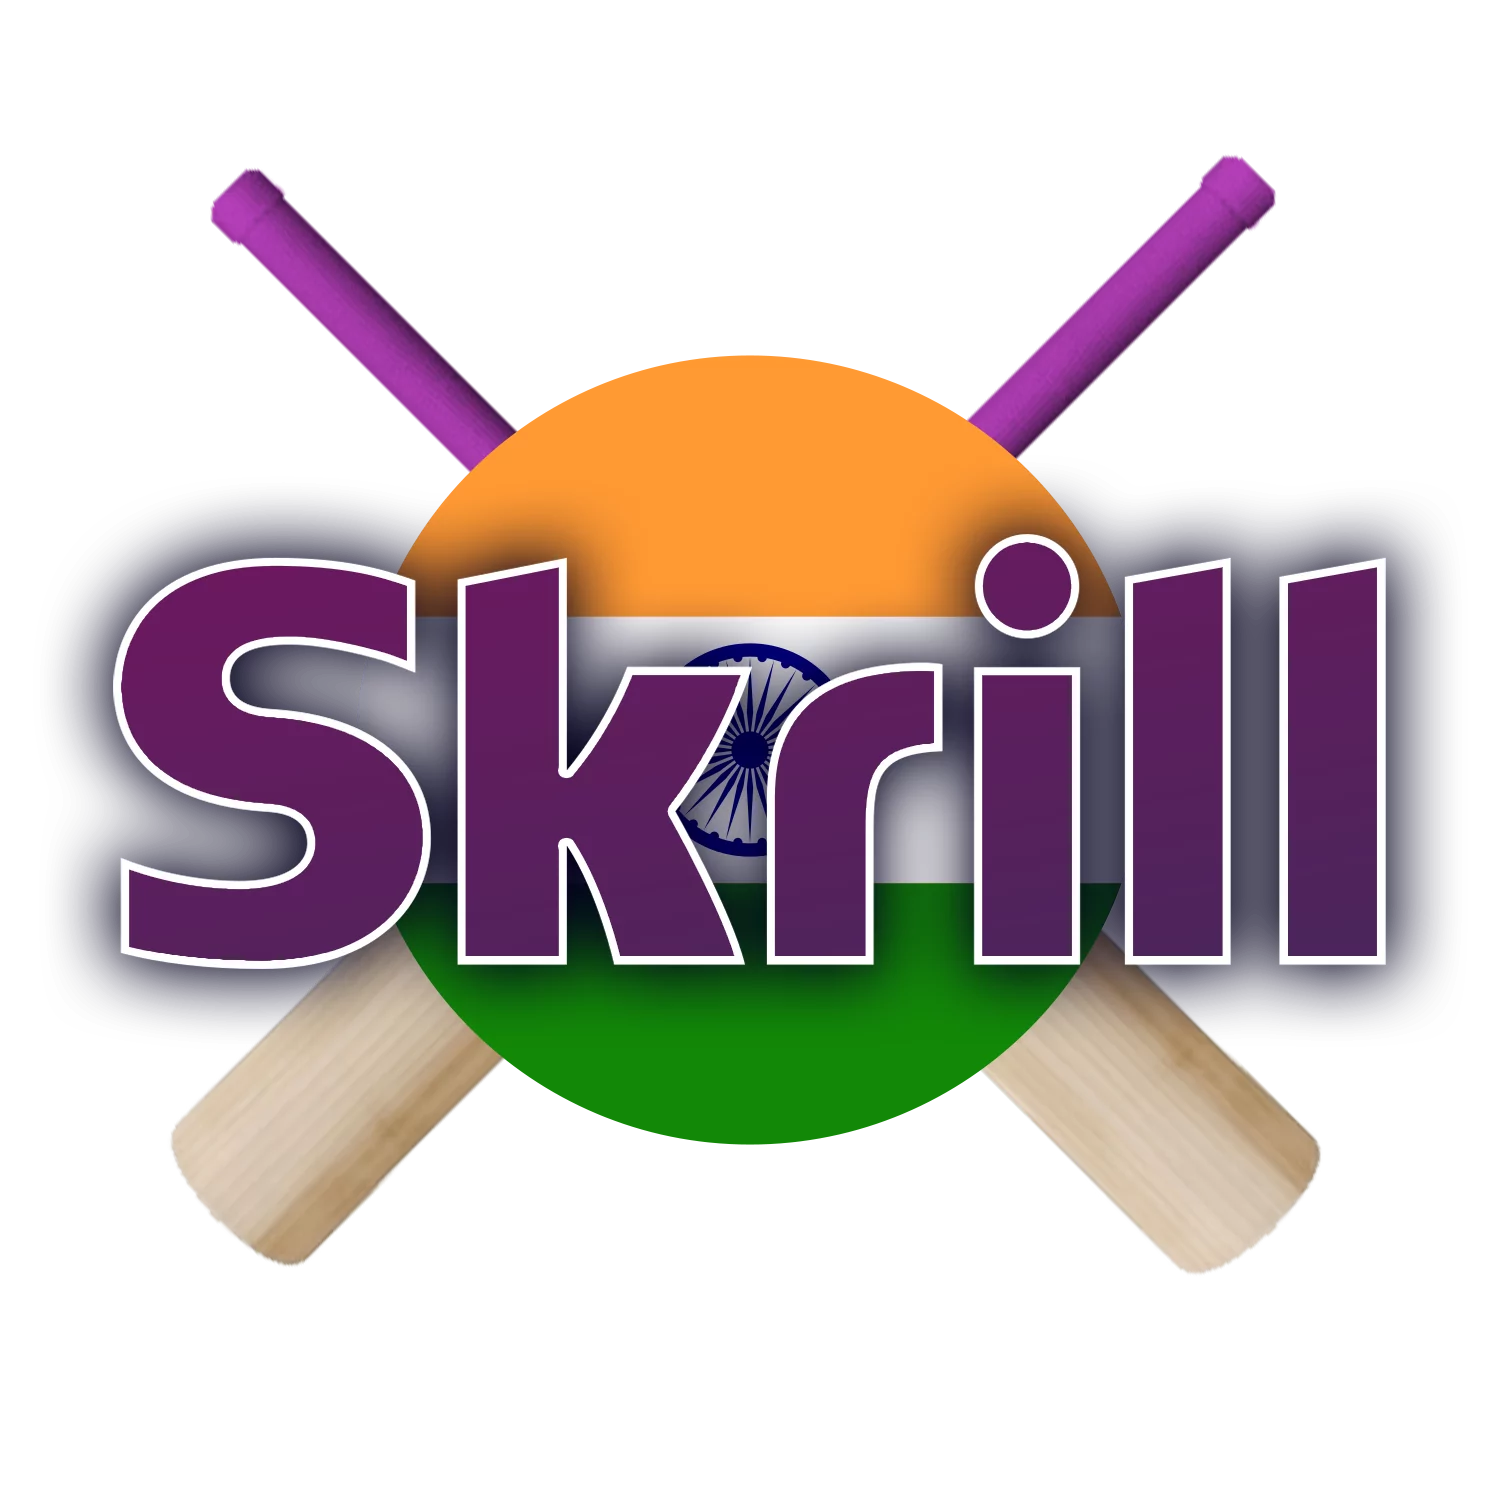 Skrill is one of the most popular and spread deposit methods.